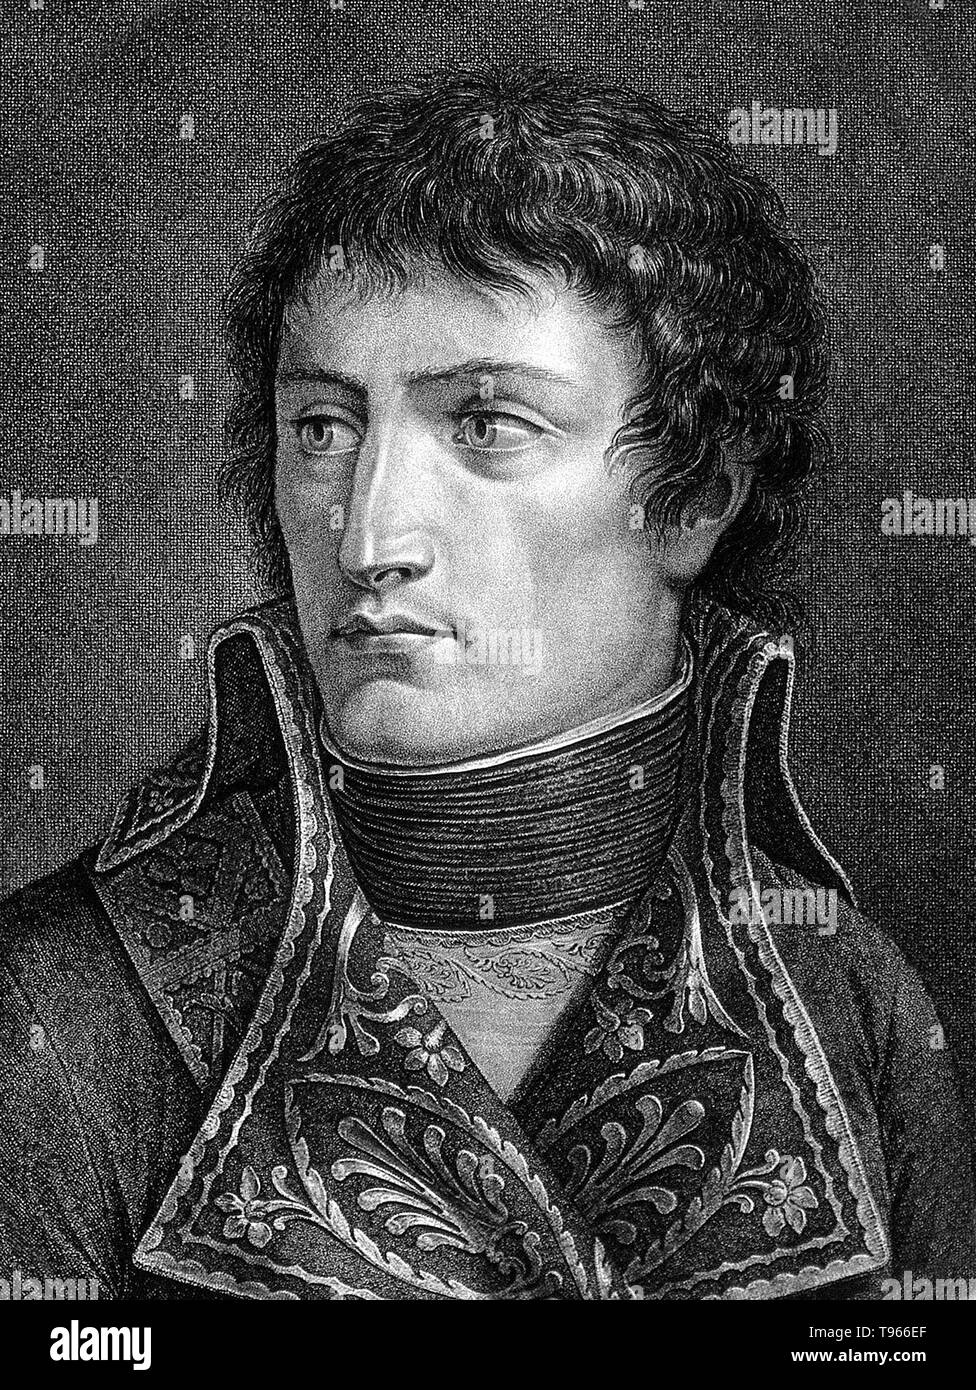 Napoleon Bonaparte (August 15, 1769 - May 5, 1821) was a French military and political leader during the latter stages of the French Revolution. As Napoleon I, he was Emperor of the French from 1804 to 1815. His legal reform, the Napoleonic Code, has been a major influence on many civil law jurisdictions worldwide, but he is best remembered for his role in the wars led against France (Napoleonic Wars).  Napoleon was confined by the British on the island of Saint Helena and died there in 1821. Stock Photo